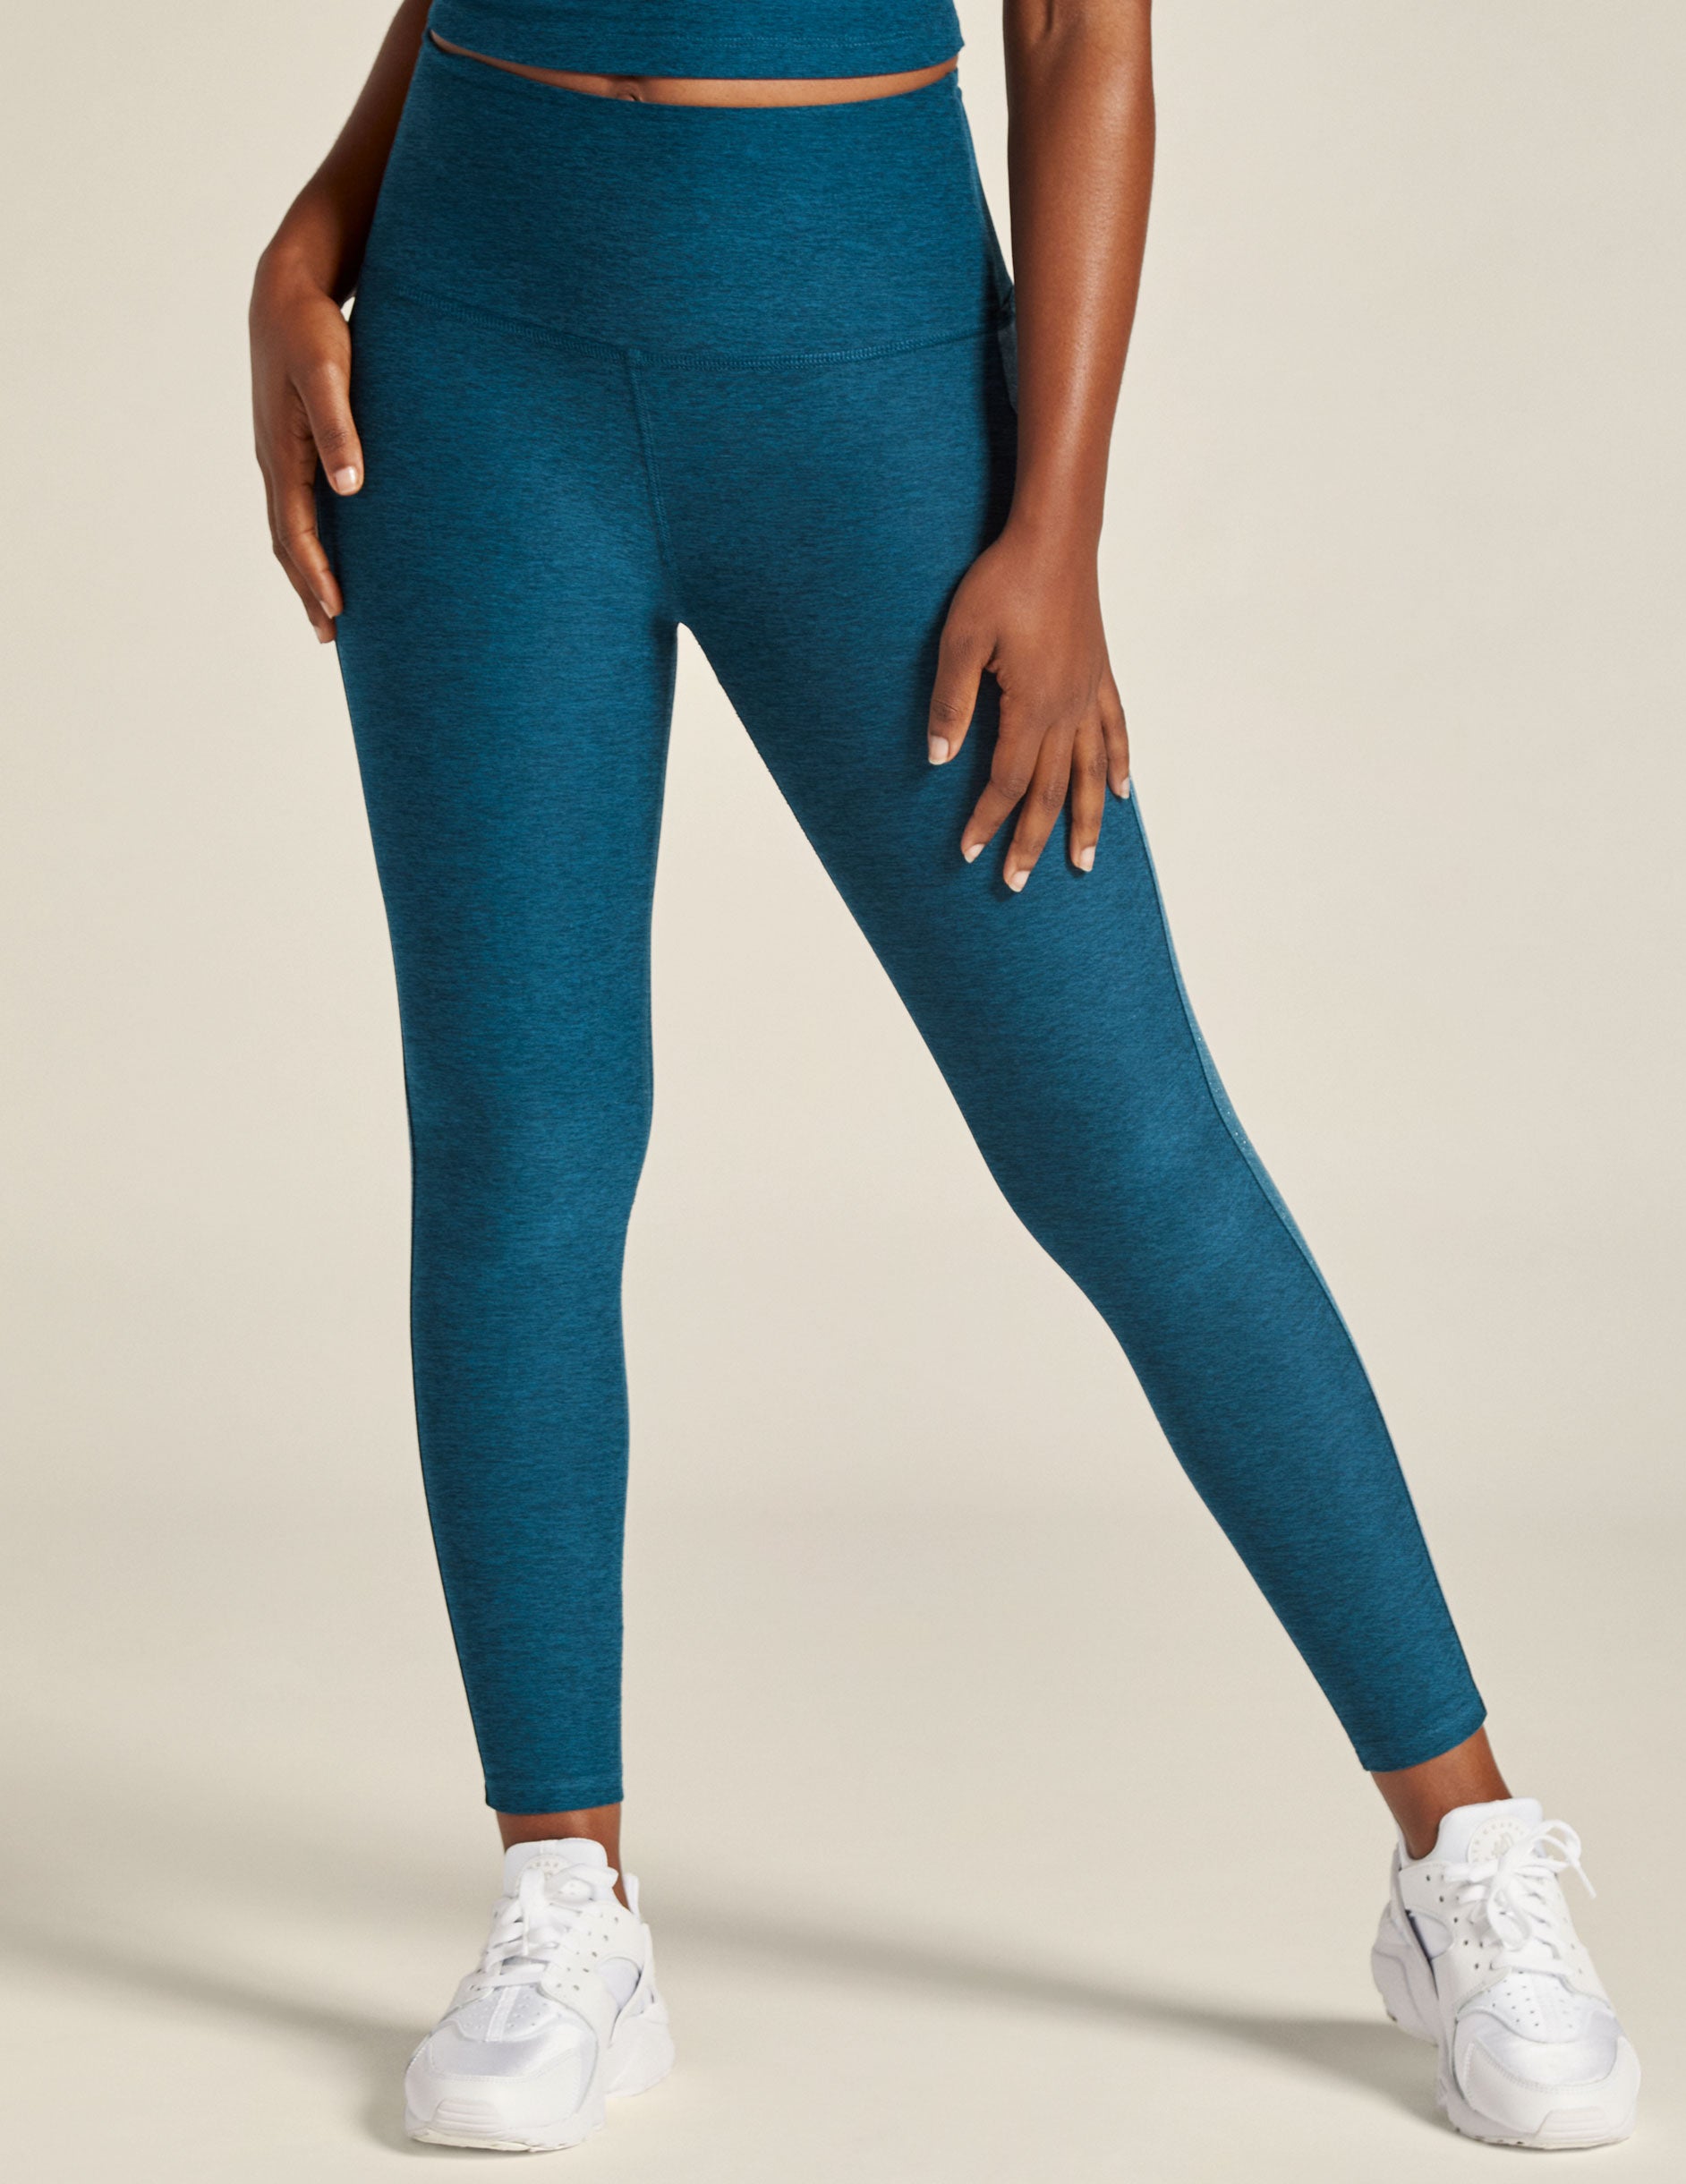 Urban Outfitters Beyond Yoga Softshine Sparkly High-Waisted Midi Legging